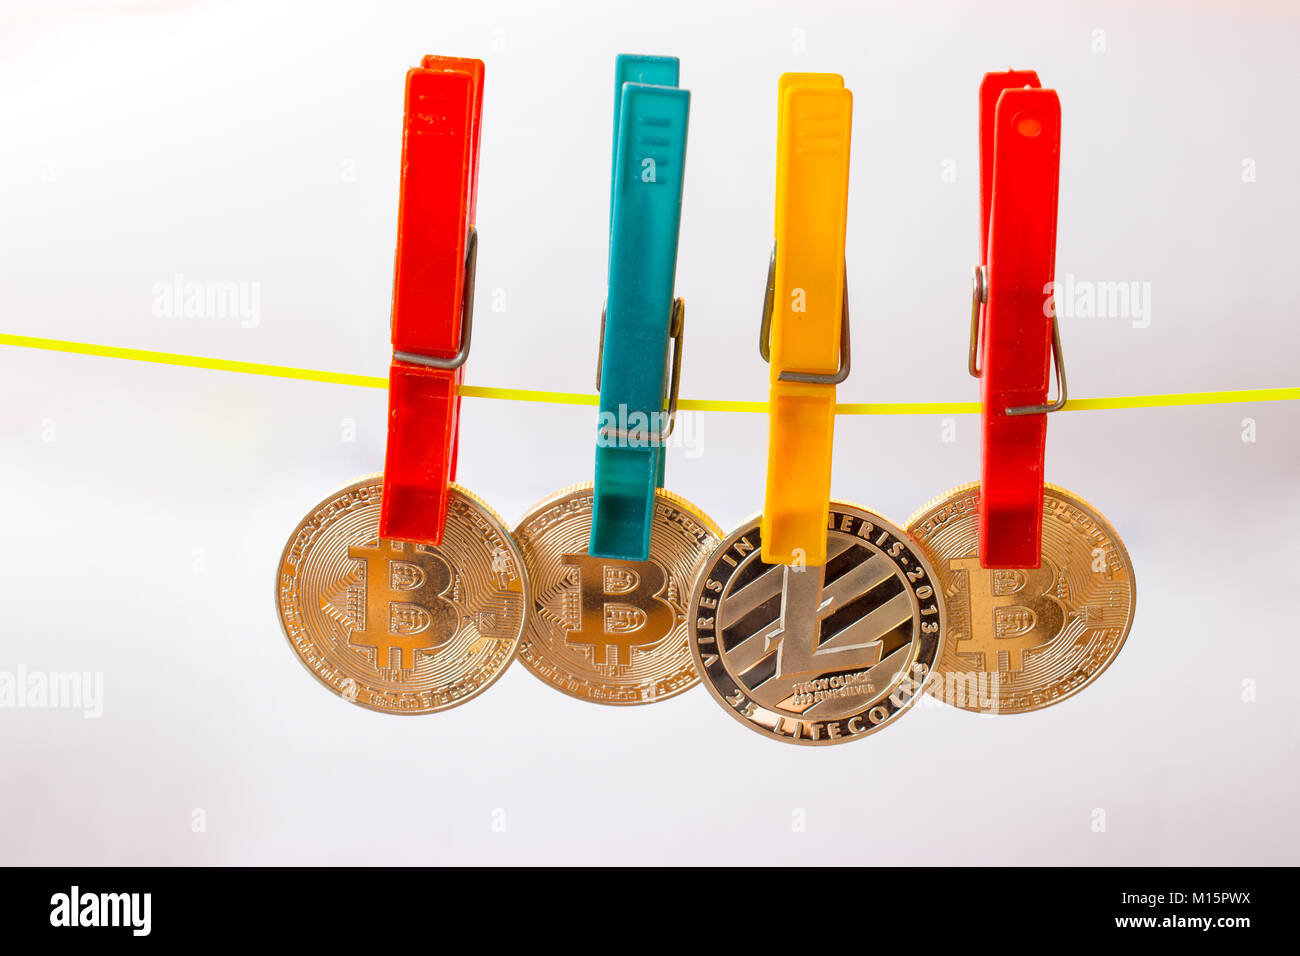 Colorful clothespins hold bitcoins and litecoin on a clothesline. The background is white. Stock Photo